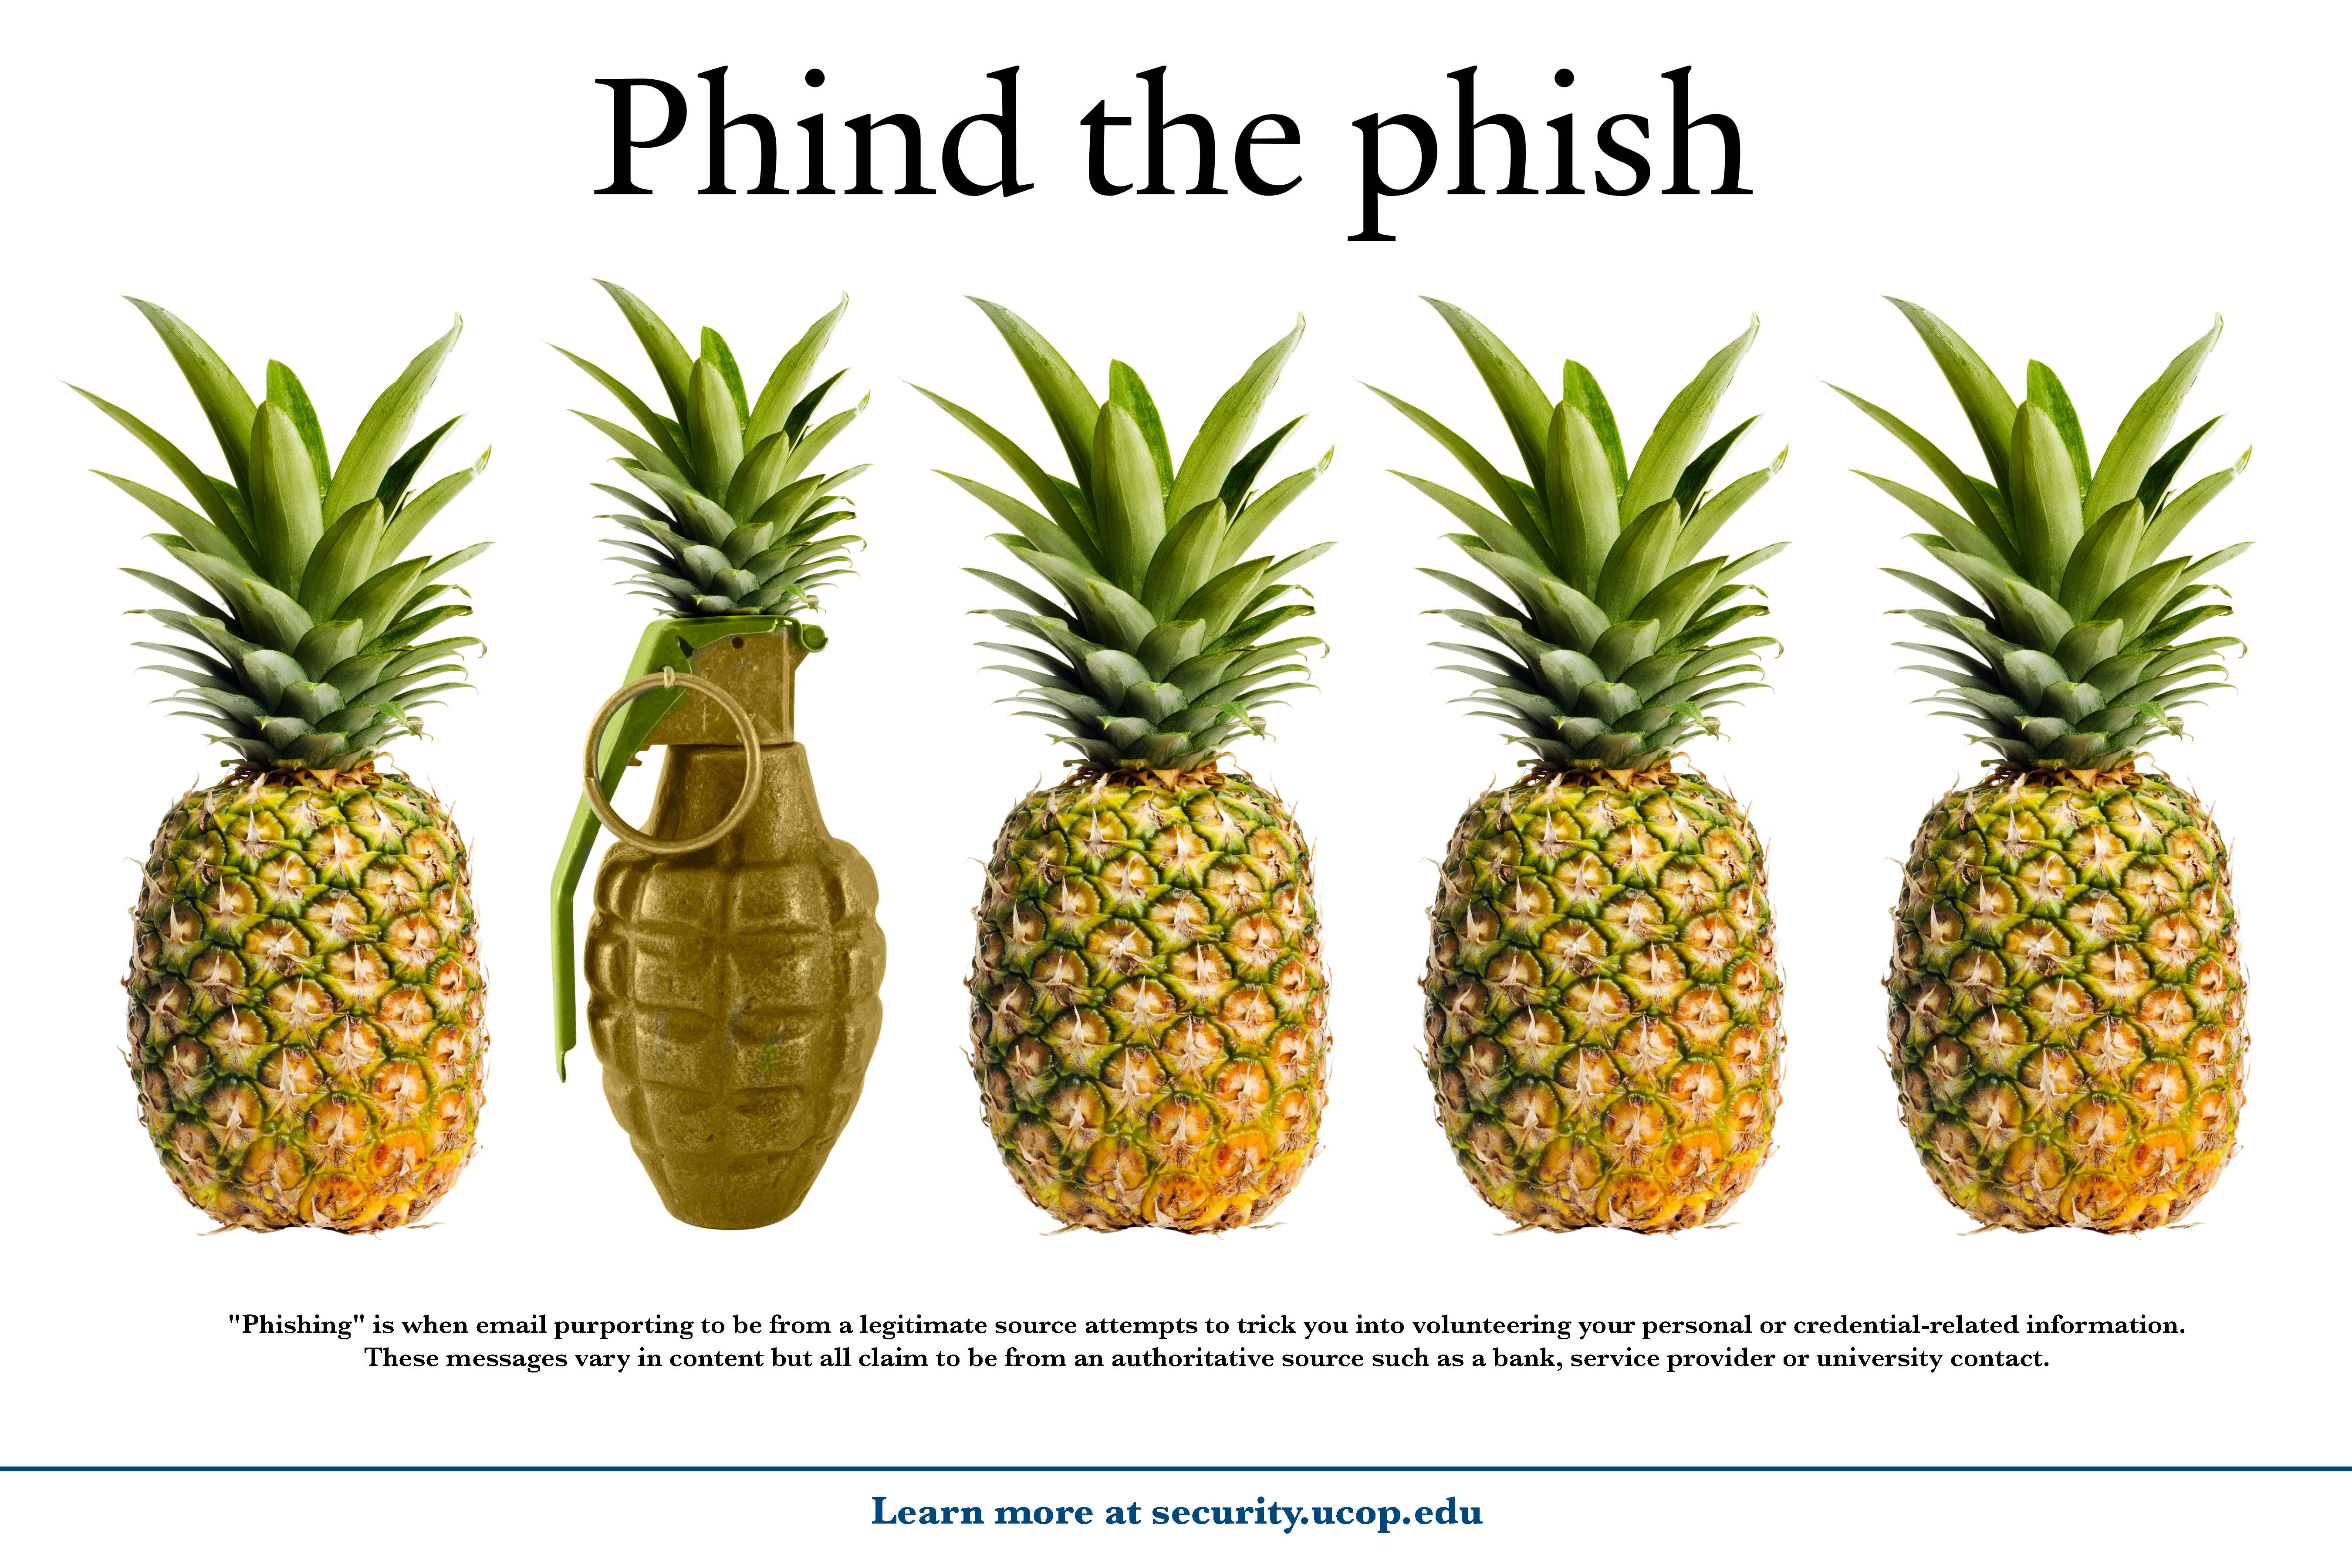 Phind the phish - pineapple-grenade